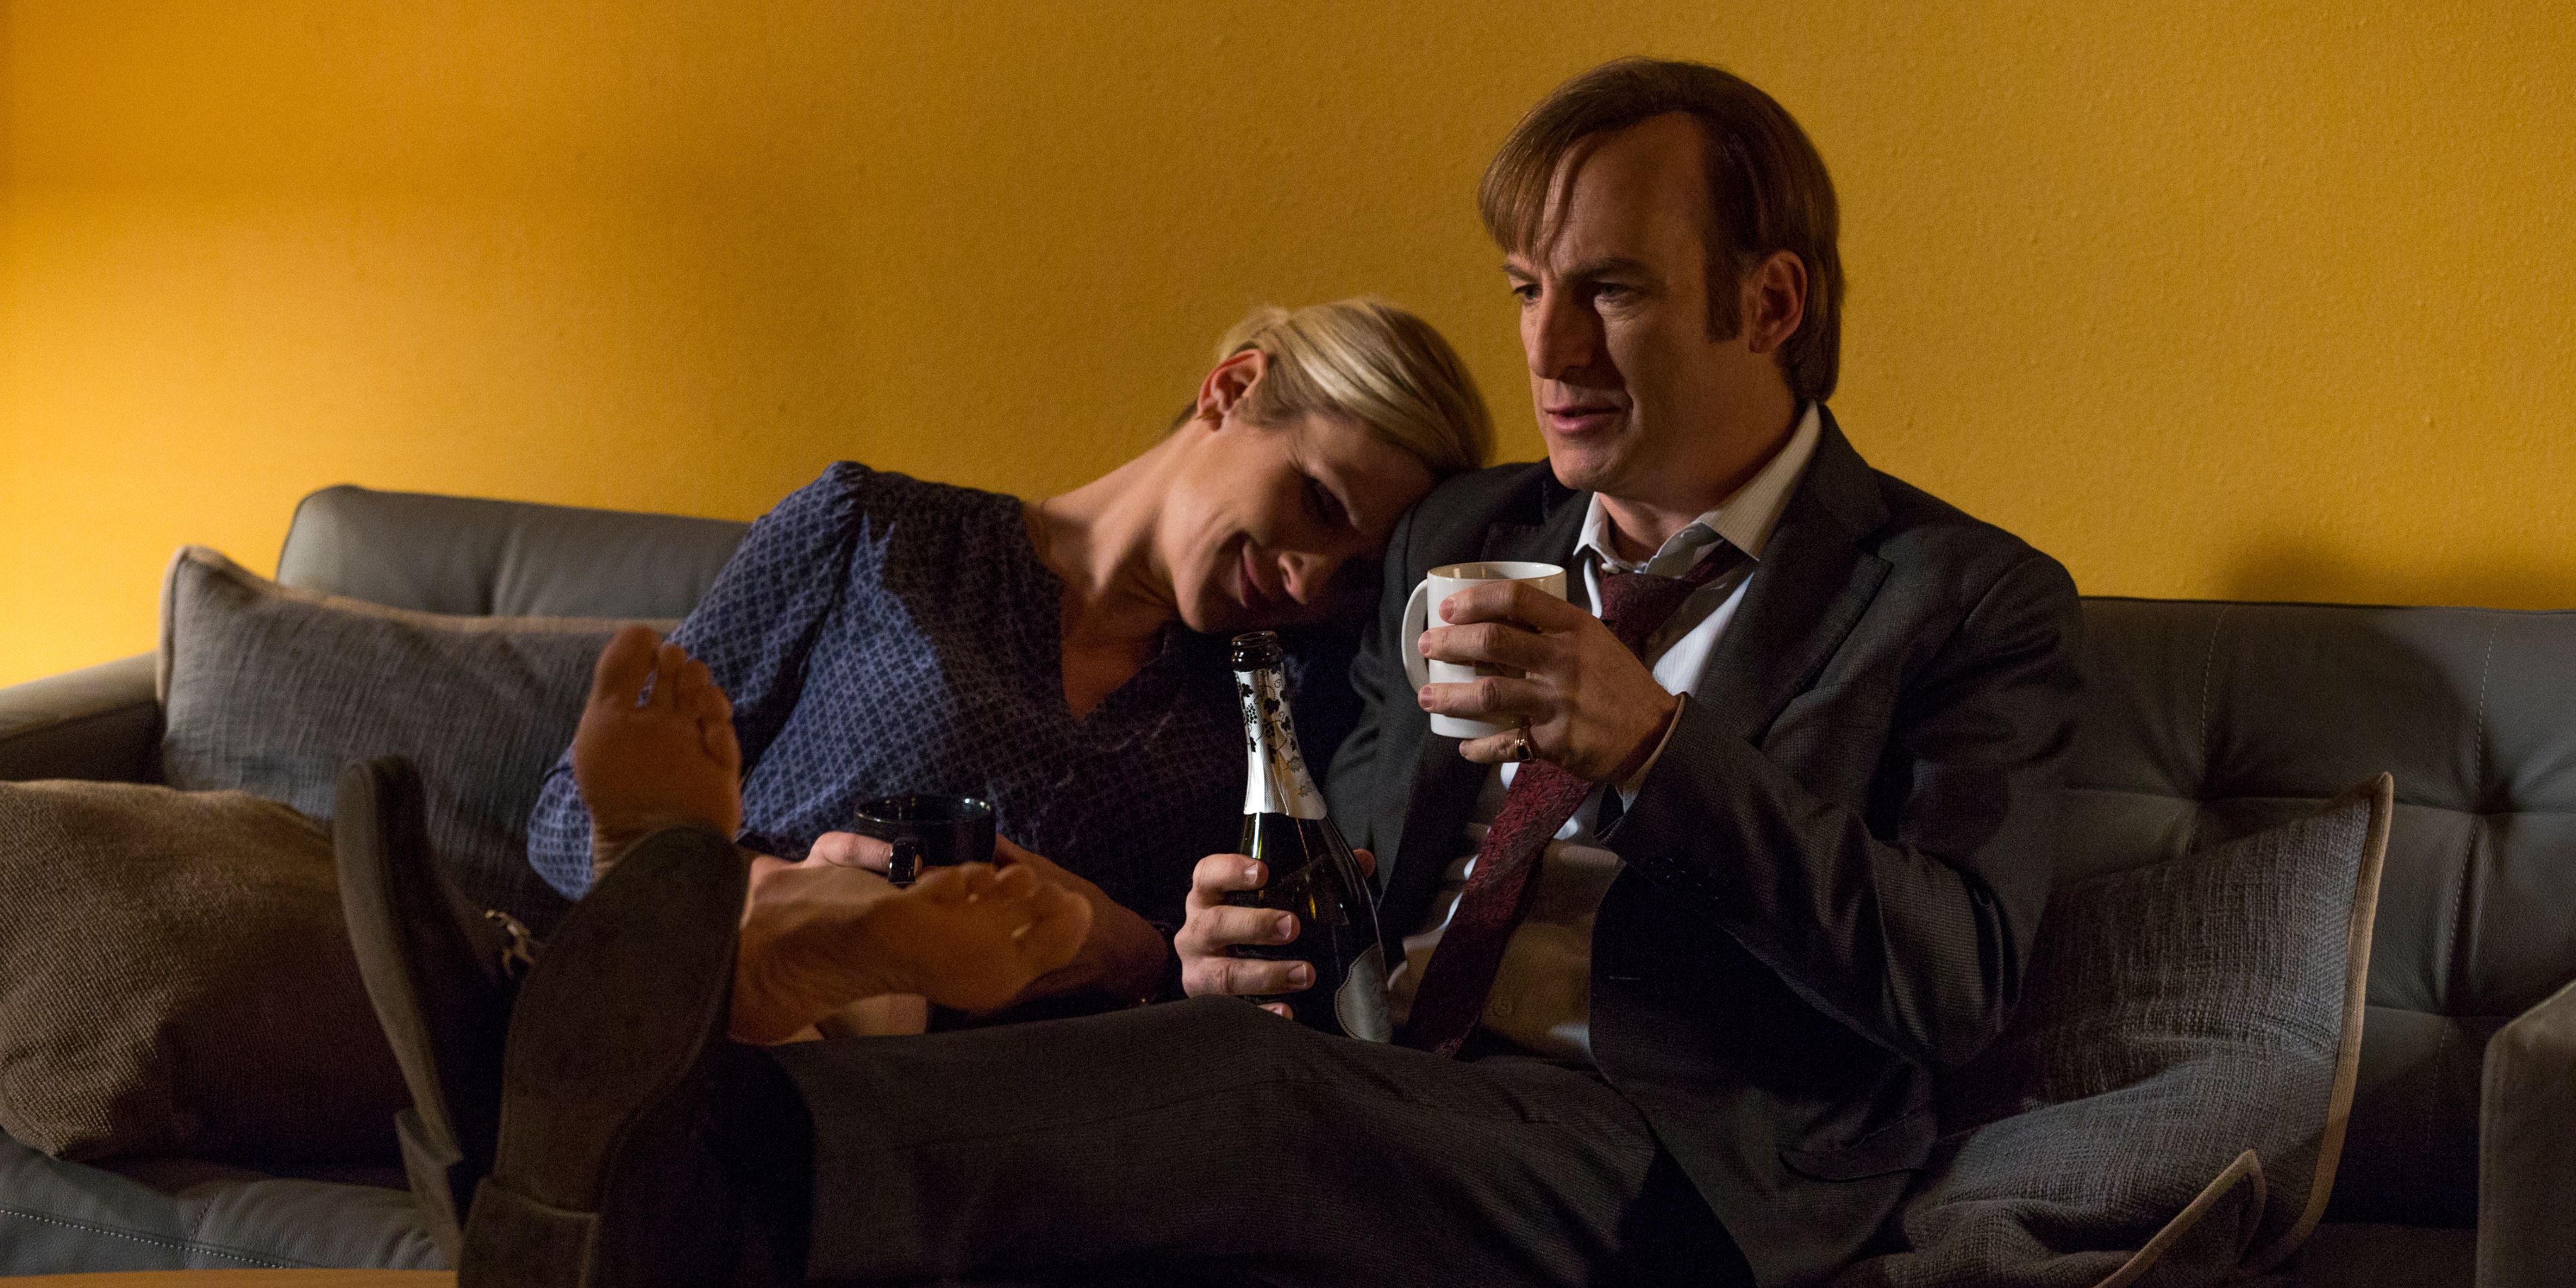 Kim and Jimmy cuddling on a couch in Better Call Saul